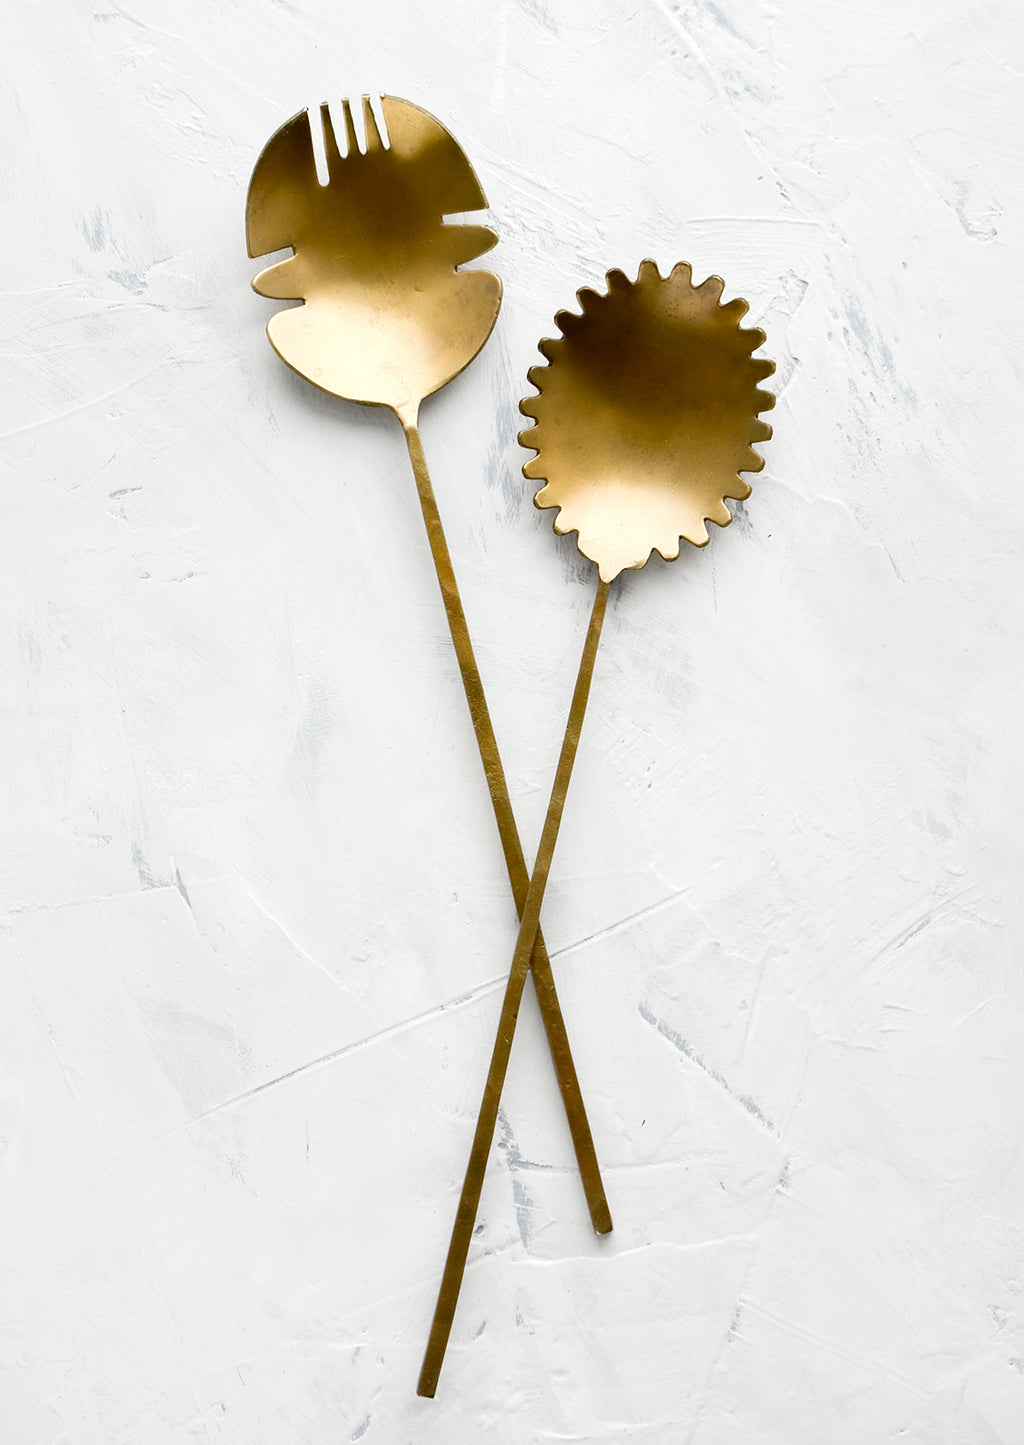 2: A pair of salad servers made from antiqued brass, shaped in a prehistoric-inspired design with slender handles.